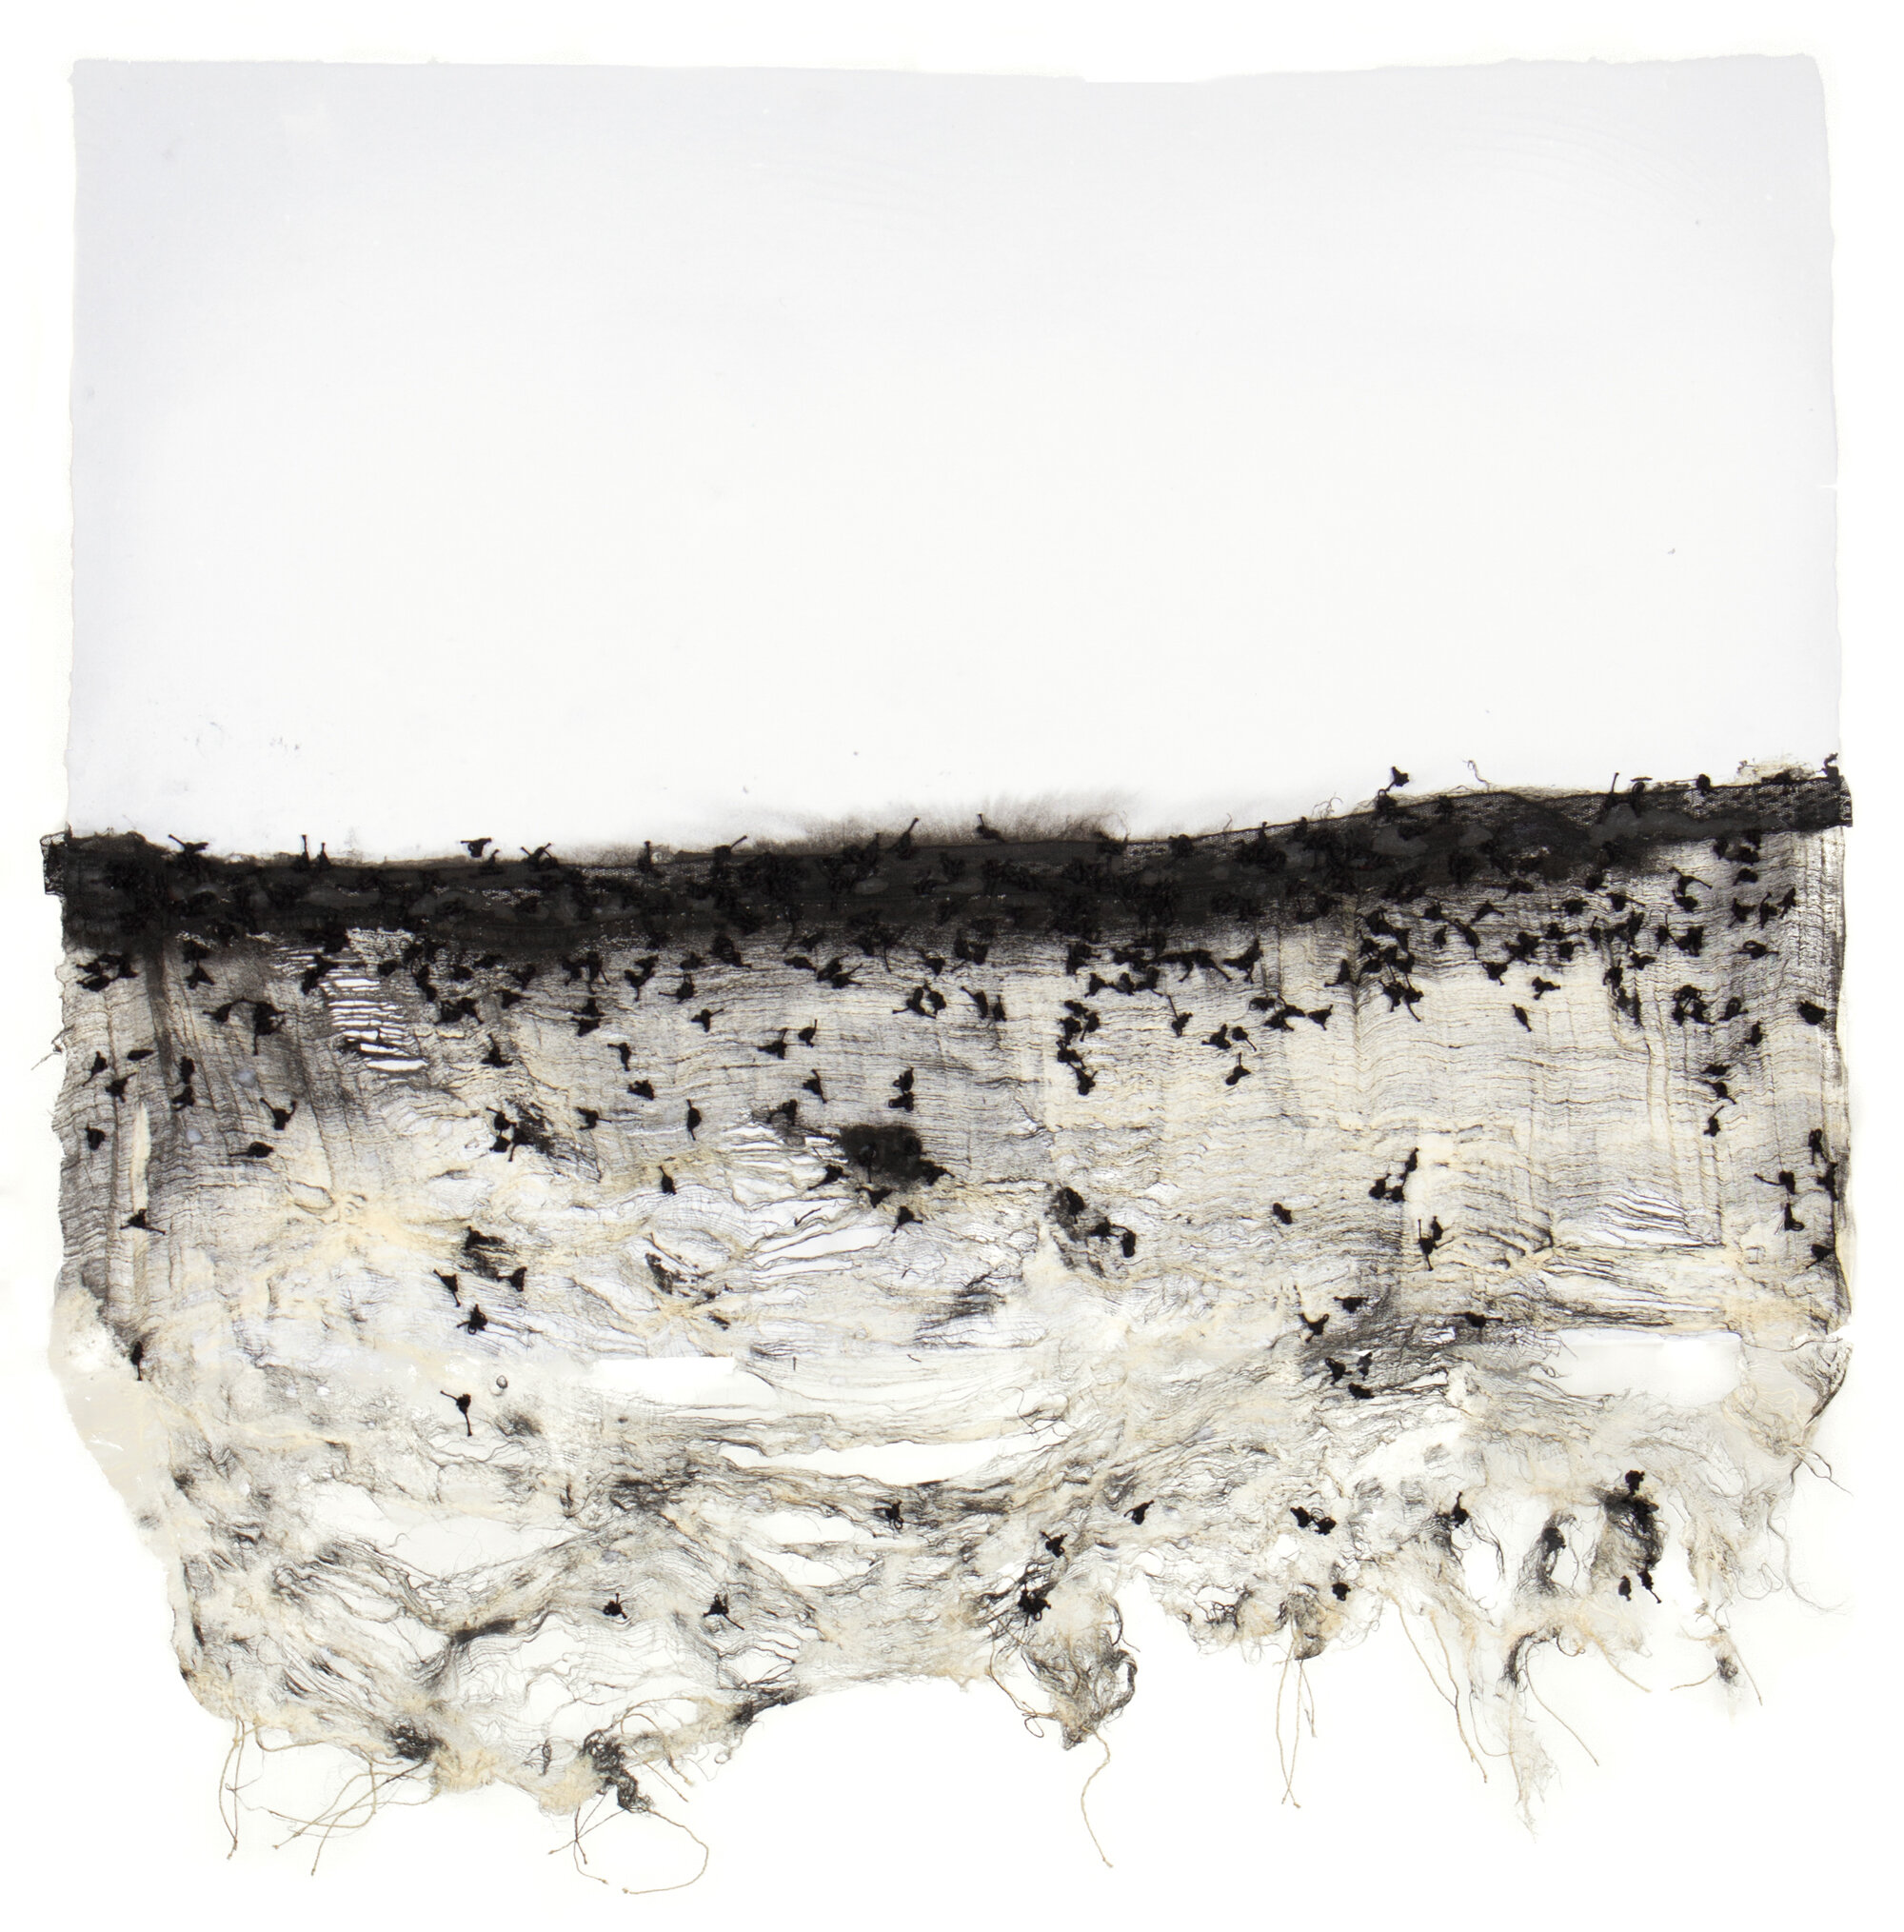   Untitled , 2019 Handmade linen paper, fabric, lace, thread, pigment, and paper pulp 30.5 x 30.5 in. 